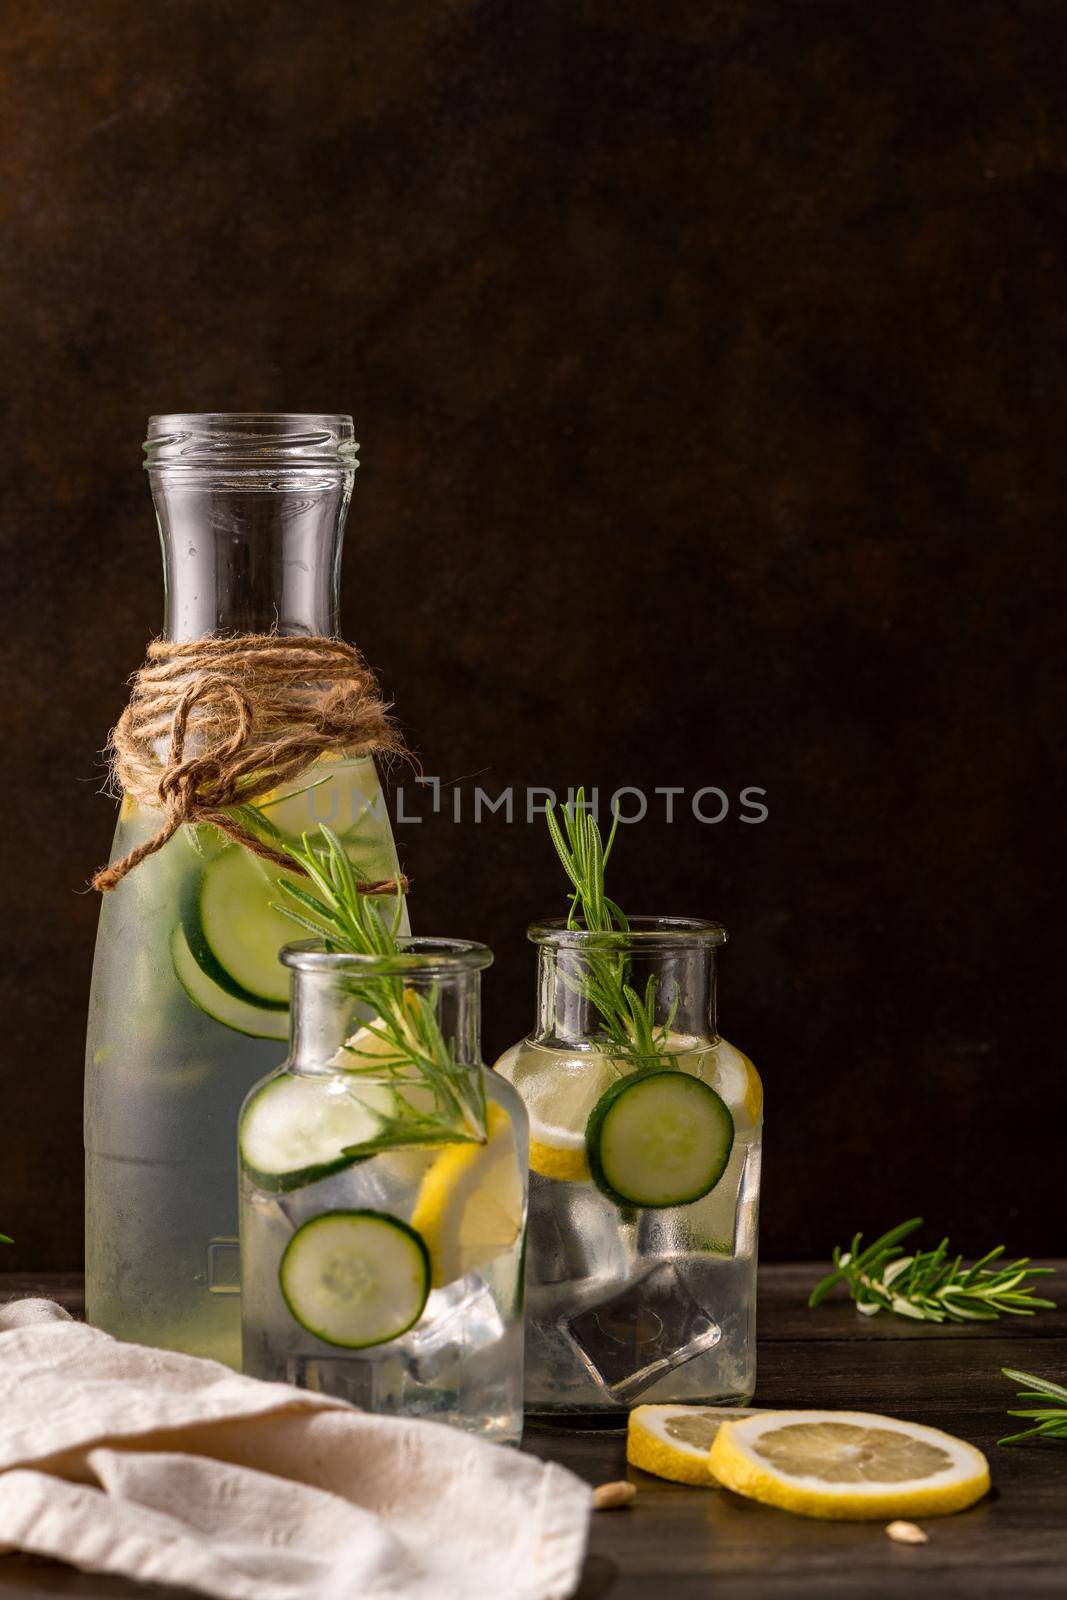 Water flavored with lemon by homydesign